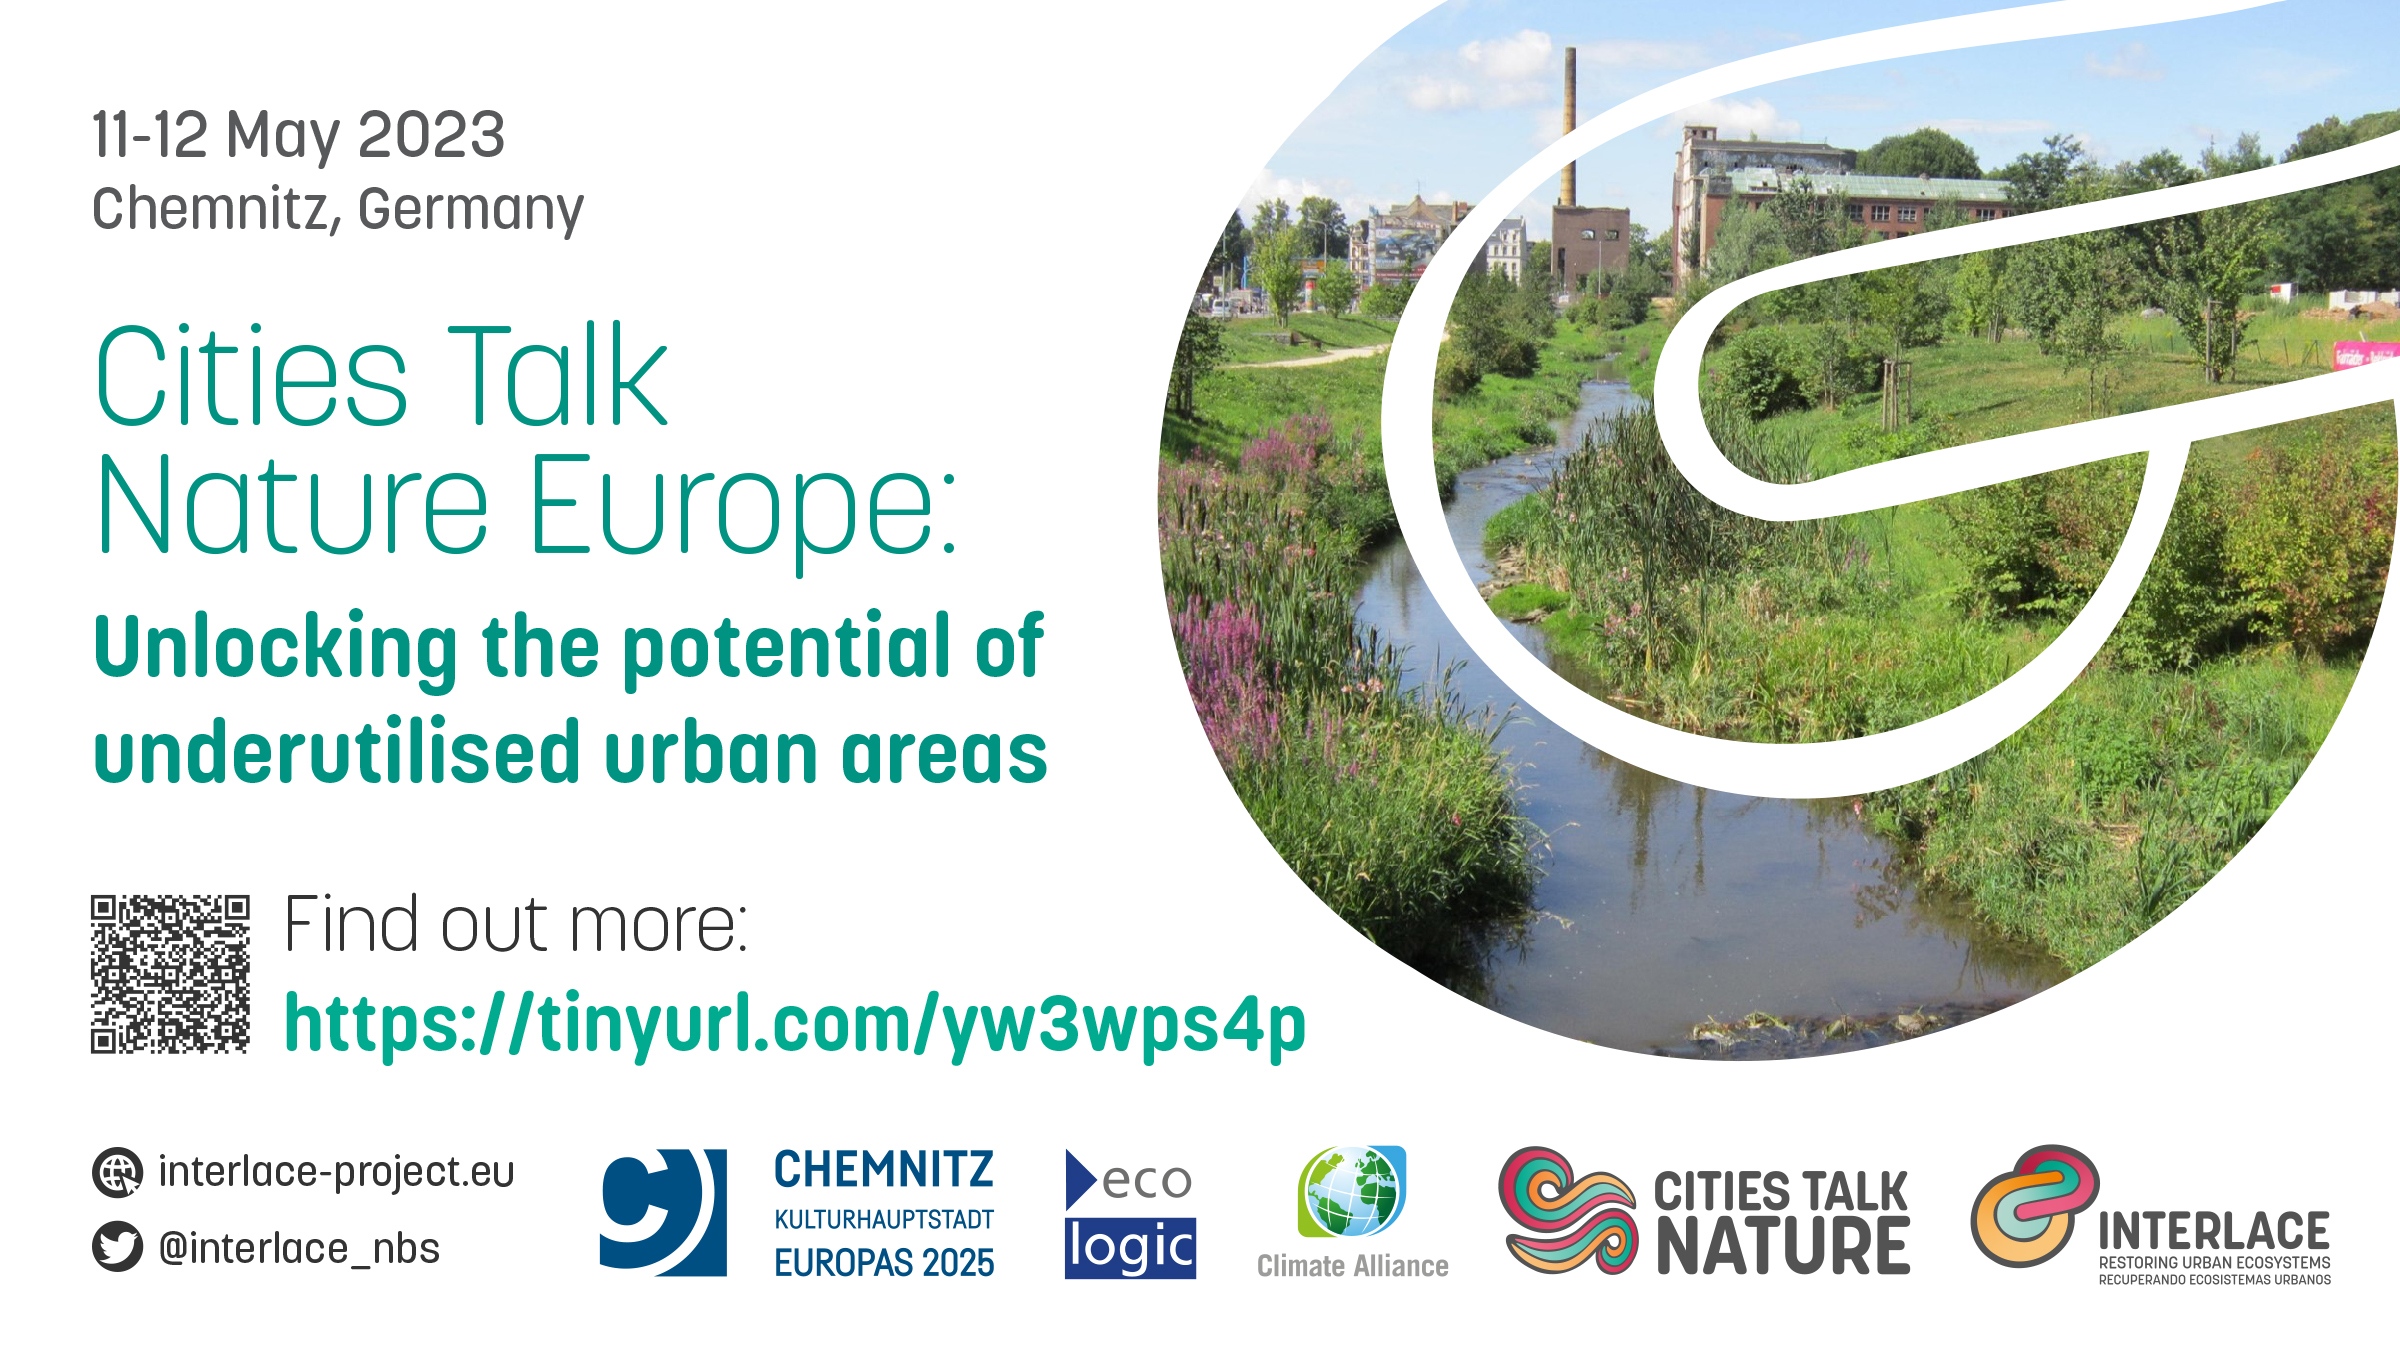 Social Media Card of the Event "Cities Talk Nature Europe" on 11 and 12 May 2023. In the Background a green riverbank in the City of Chemnitz, Germany